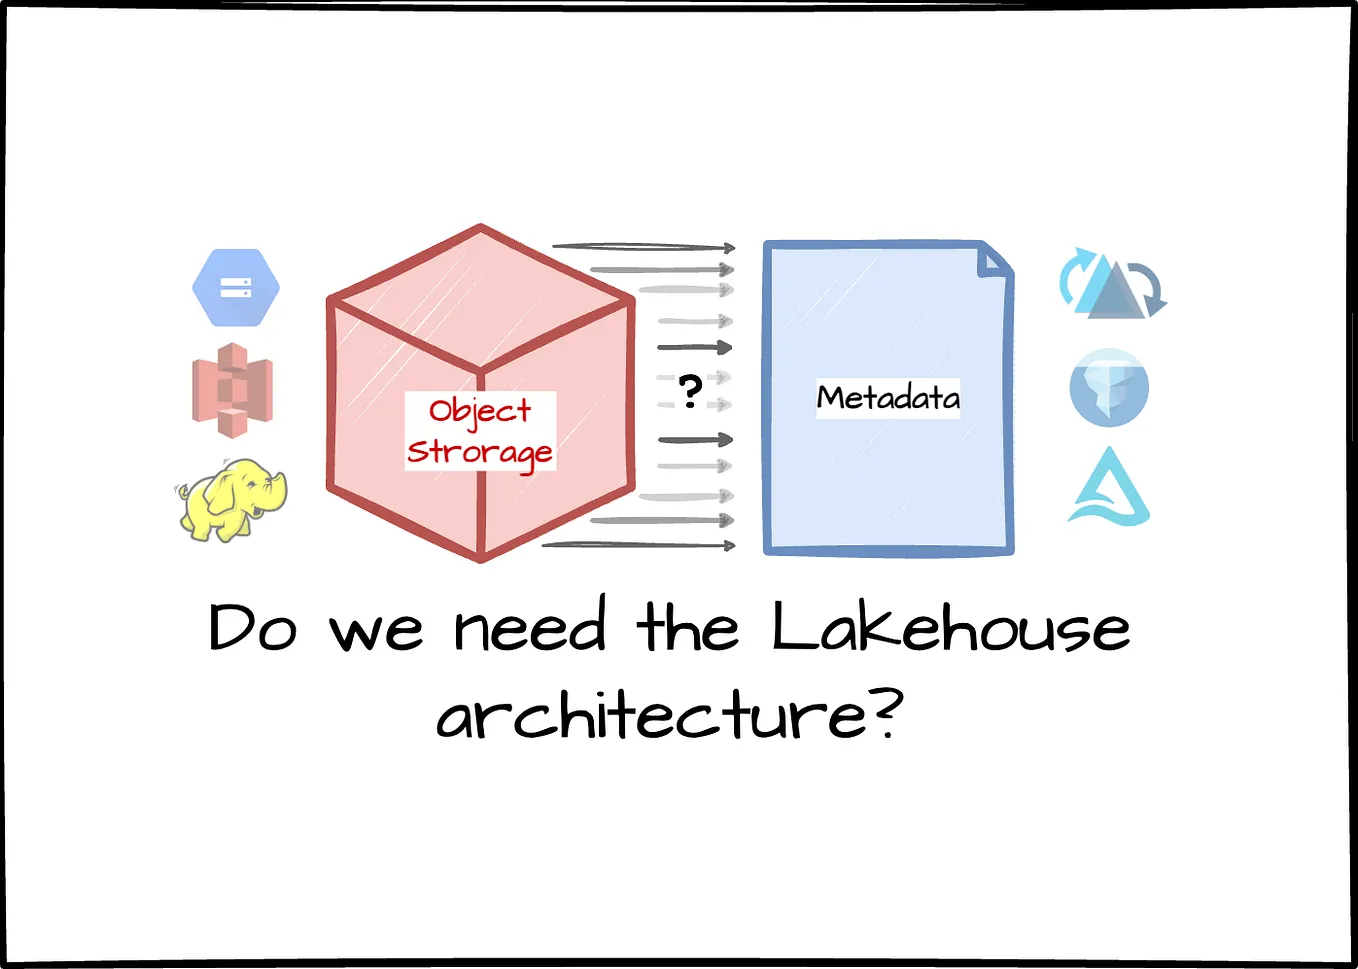 Do We Need the Lakehouse Architecture?